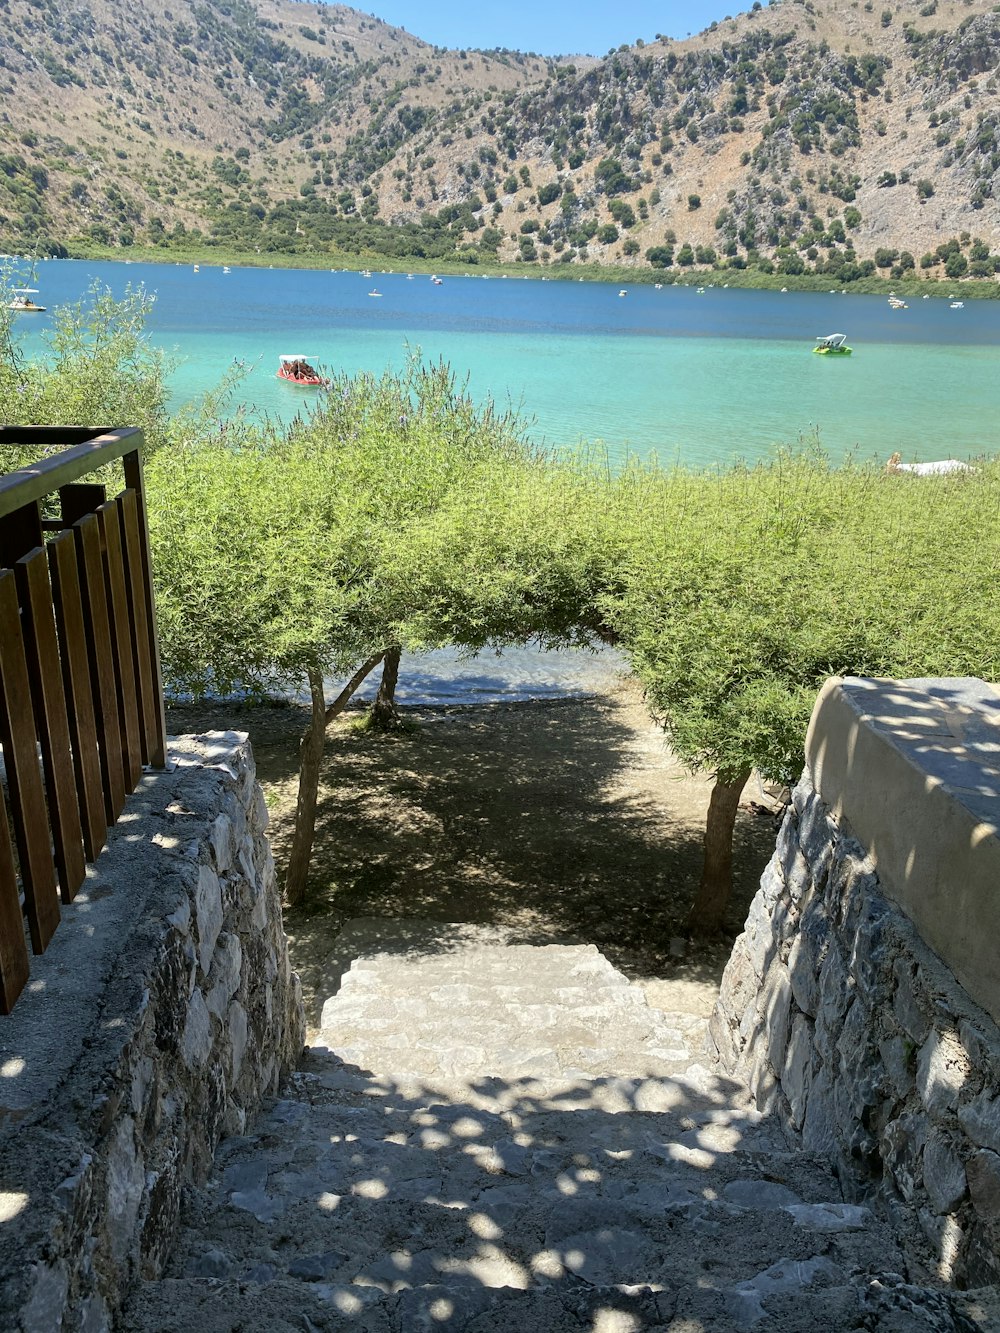 a view of a body of water from a set of stairs